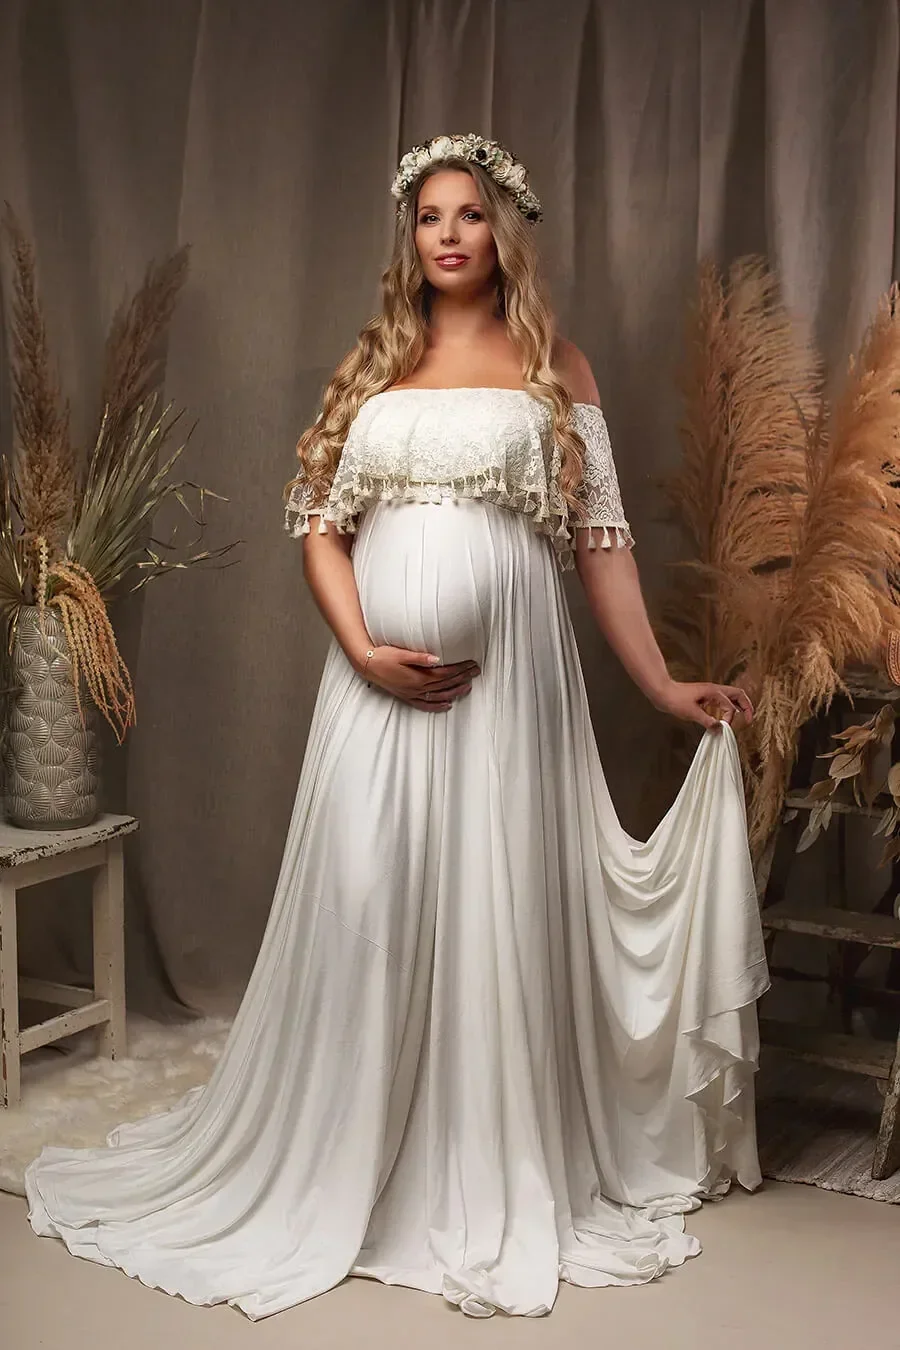 

Sexy Tassel Maternity Baby Shower Dresses Long Pregnancy Photo Shooting Dress For Pregnant Woman Photography Session Female Gown